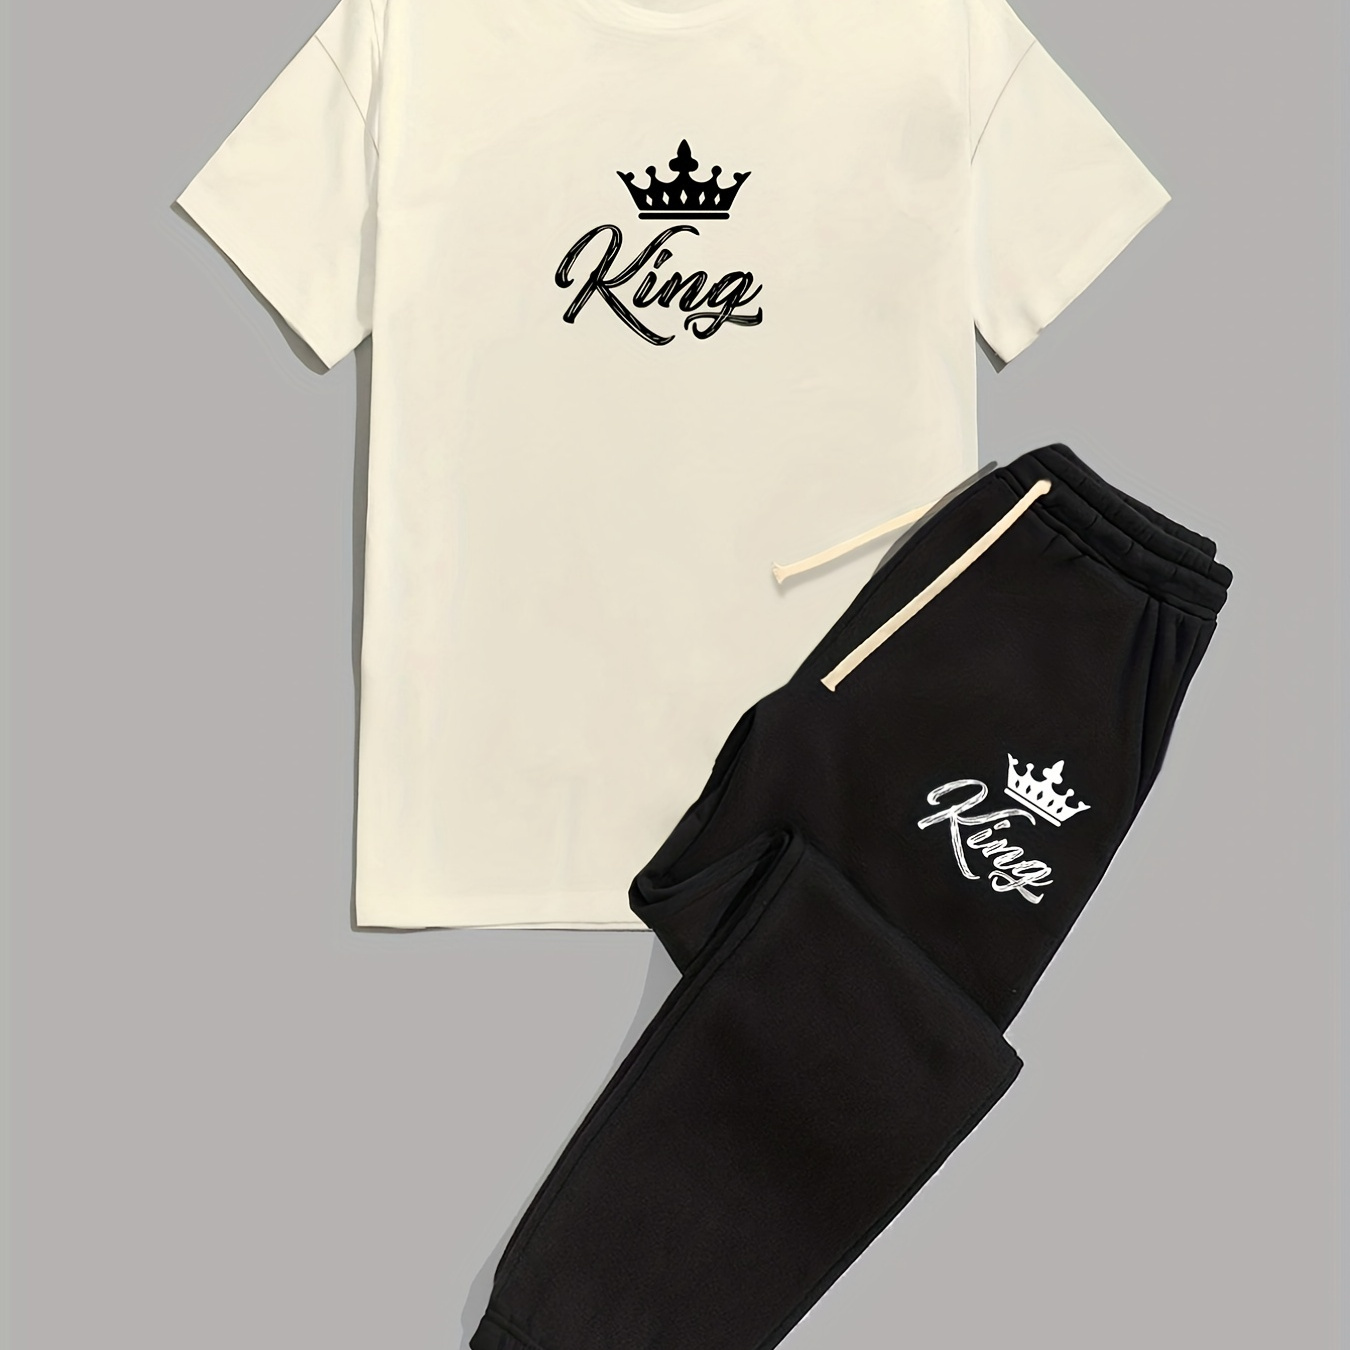 

Men's Creative "king" Graphic Print Casual T-shirt Outfit Set, Round Neck Short Sleeve Tee And Drawstring Sweatpants